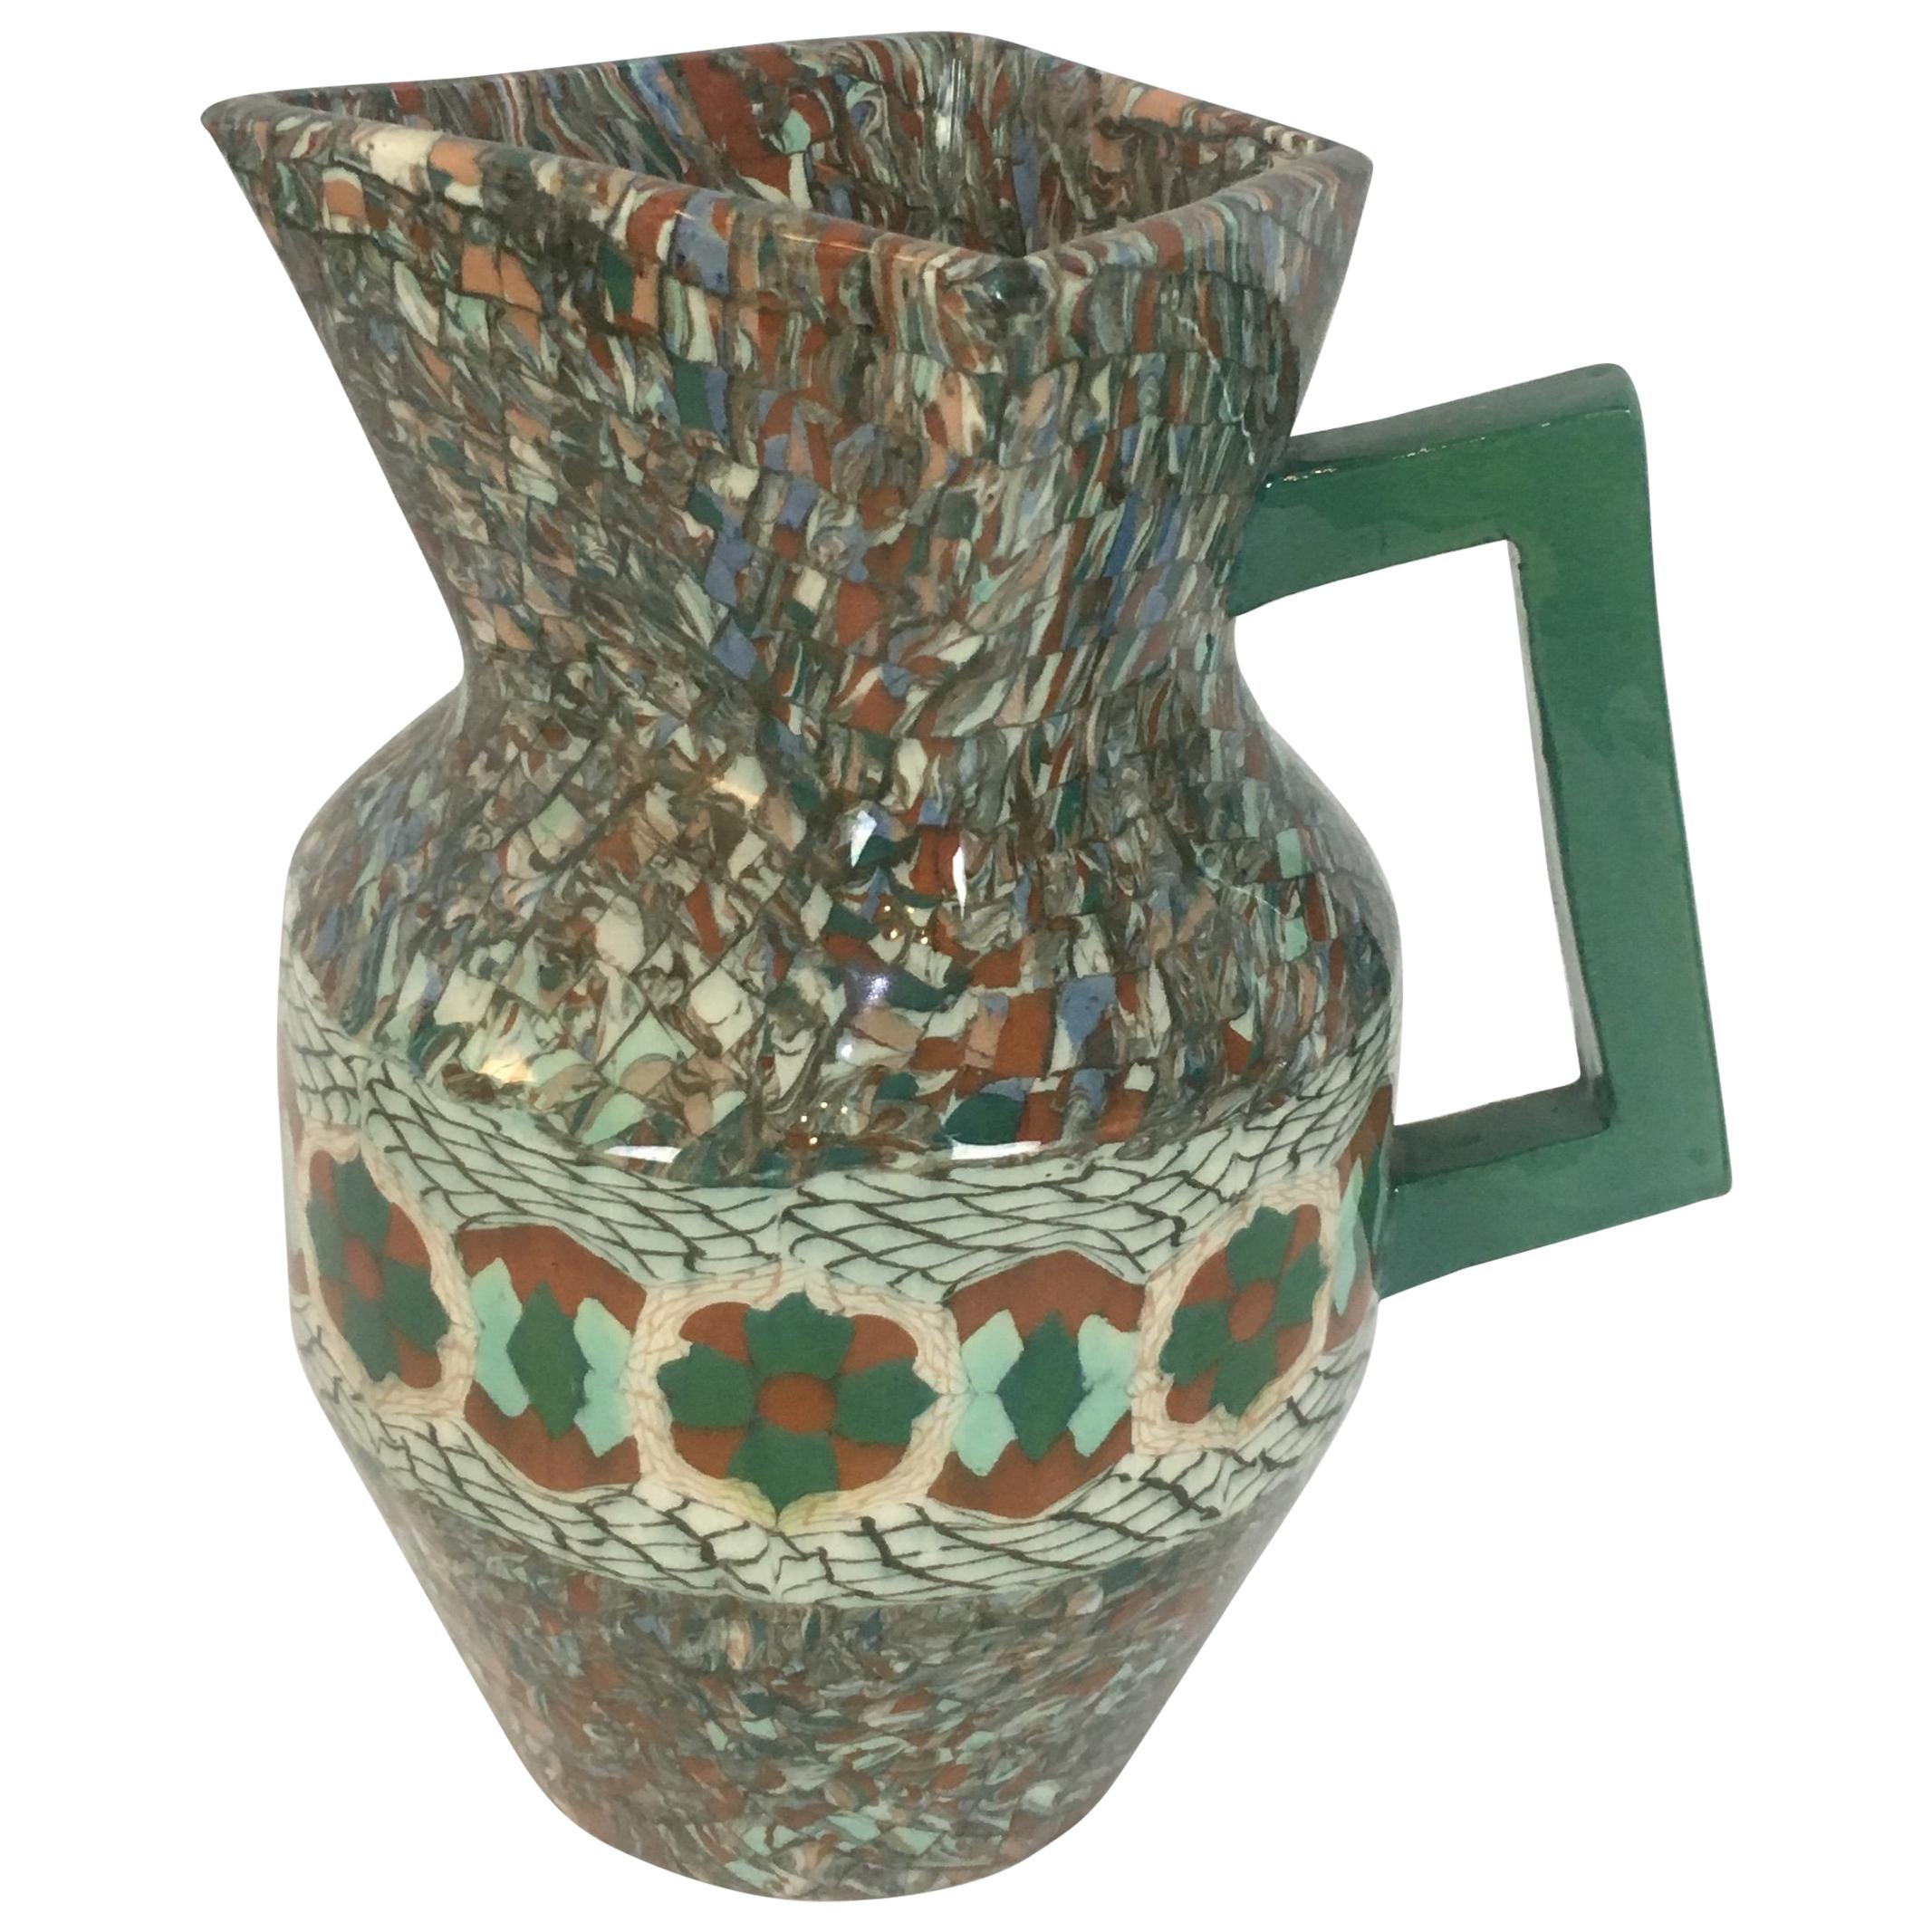 French Clay Mosaic Pitcher or Jug by Master Ceramicist Jean Gerbino